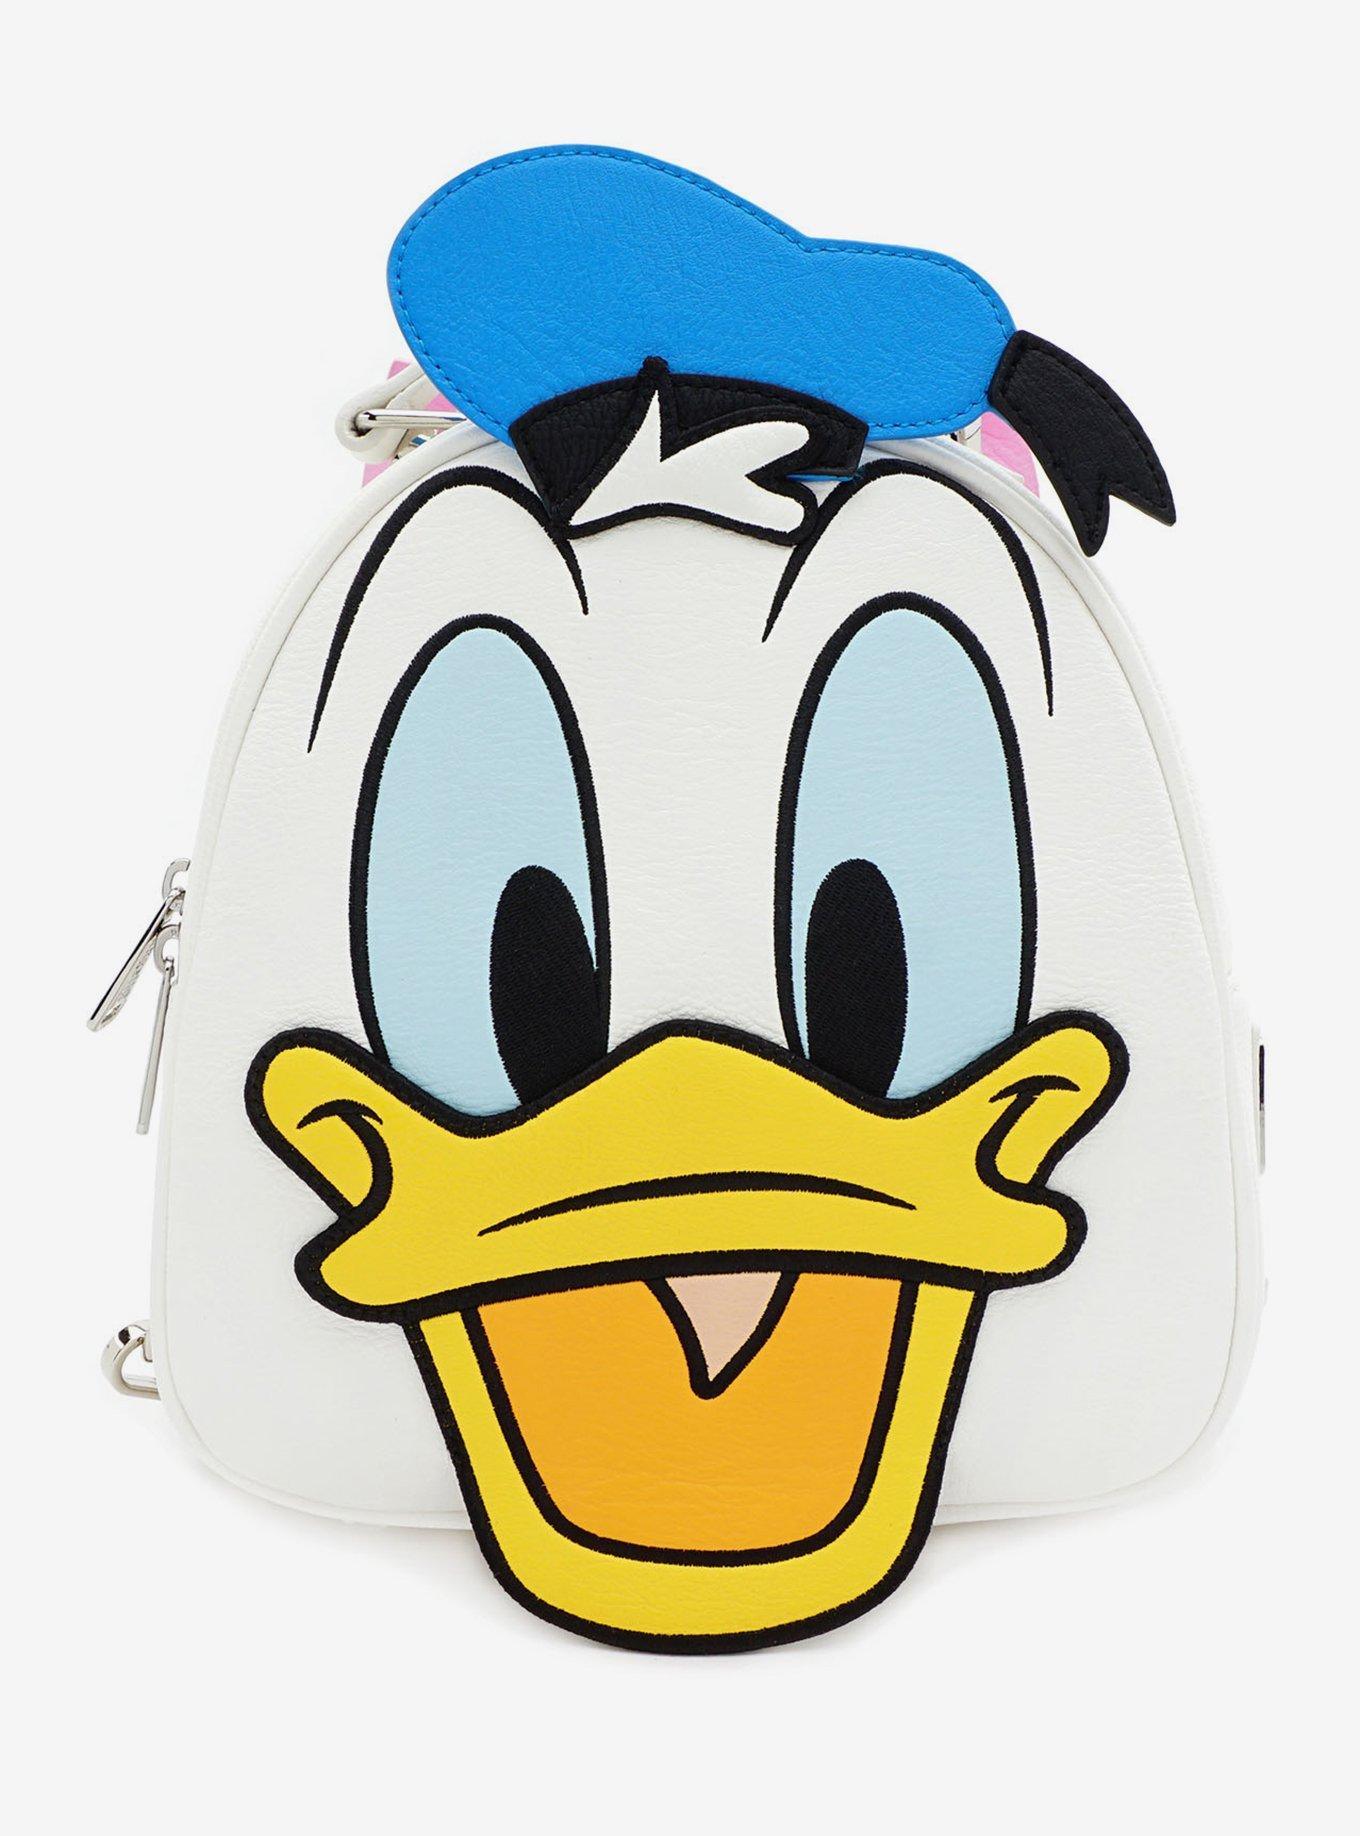 NEW Embroidery Angry Donald Duck Pin Trading Book Bag for Disney